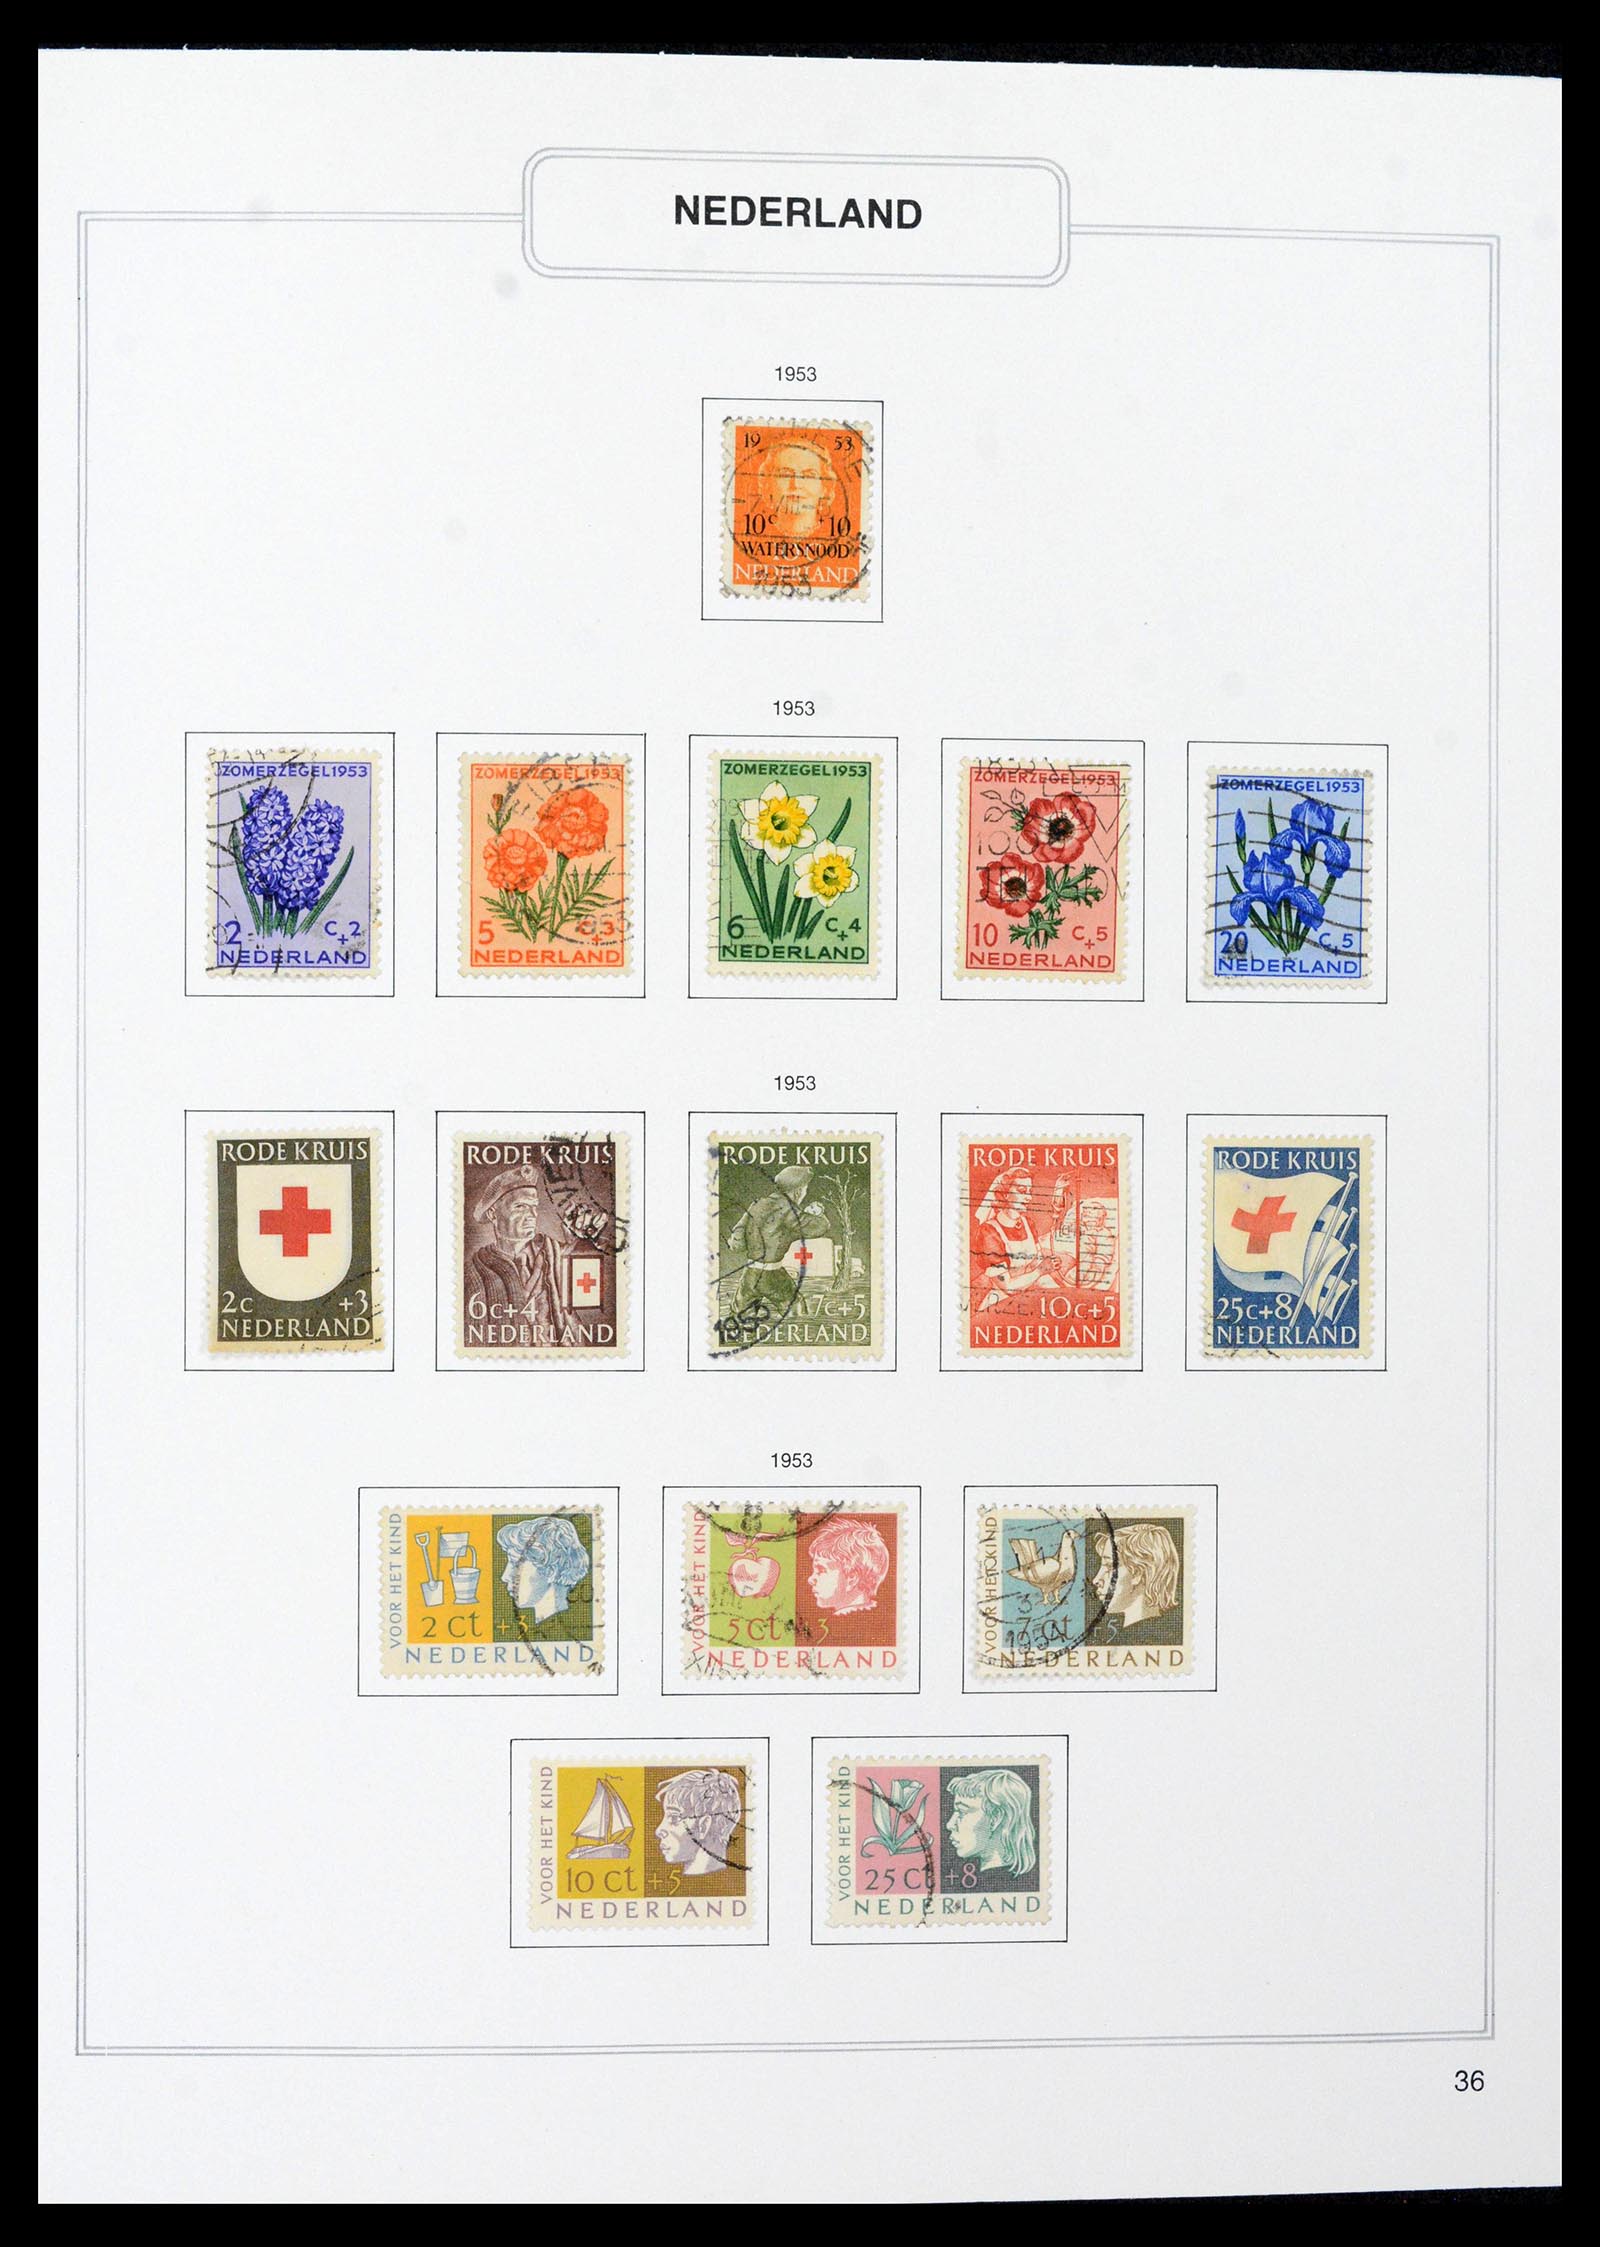 39261 0036 - Stamp collection 39261 Netherlands 1852-2015.